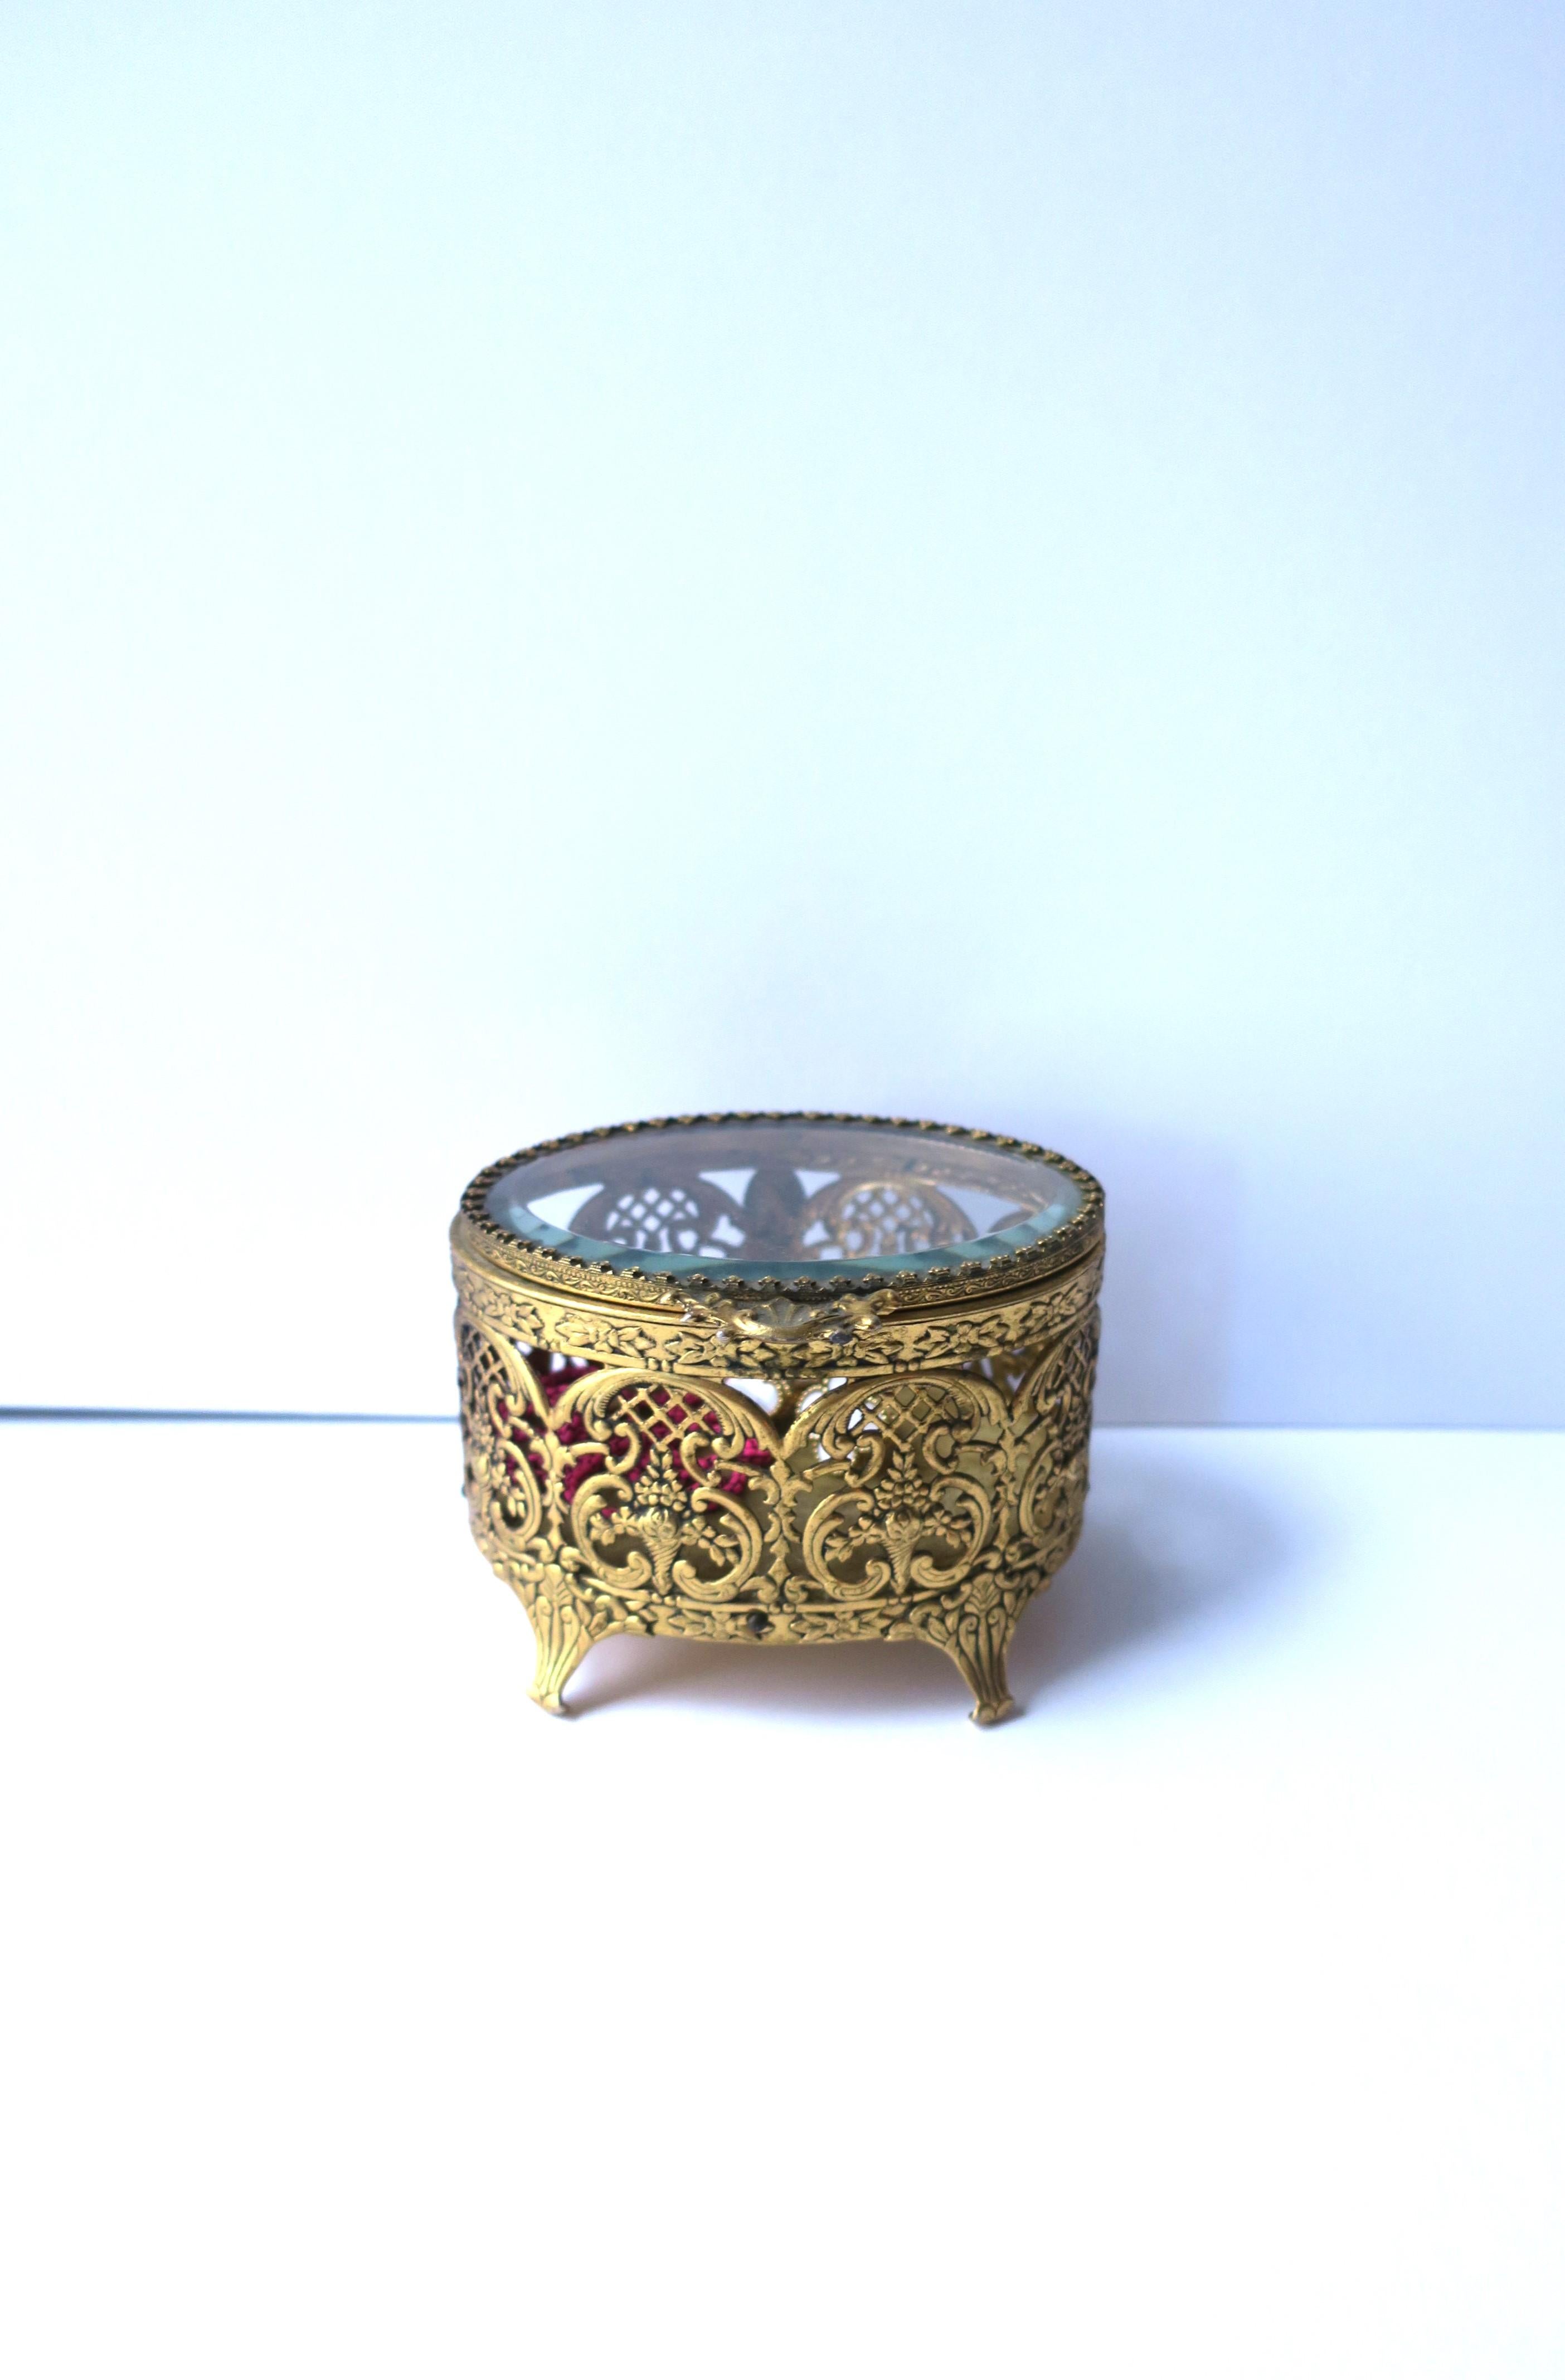 A French brass and glass jewelry box, in the Rococo style, circa early-20th century, France. This oval jewelry box is brass with a filigree design, a beveled glass hinged top, cotton velvet interior, and small curved feet. Piece may work well for a